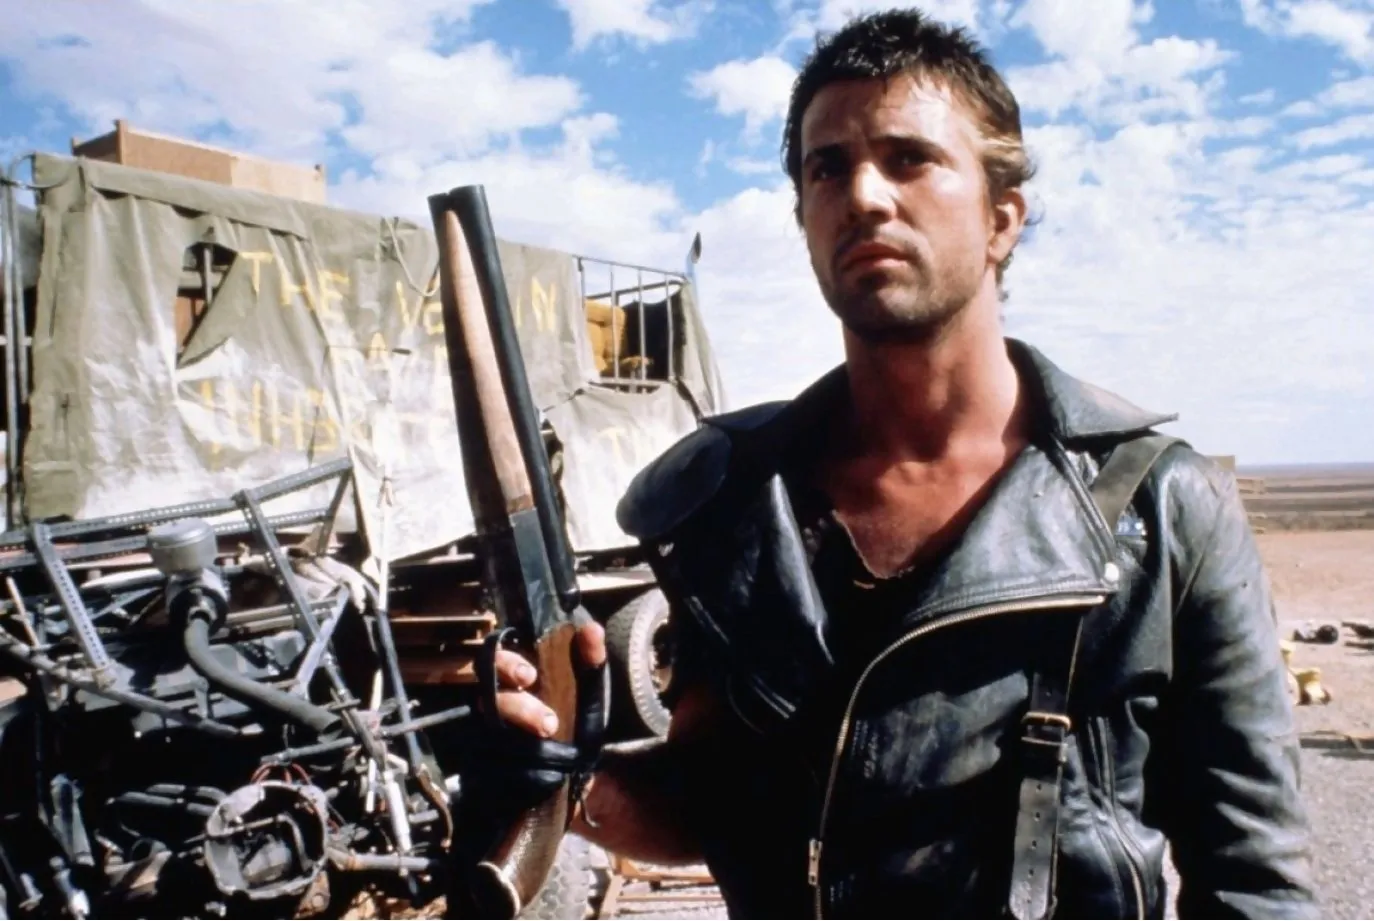 https://www.pcworld.com/article/2978400/steams-selling-all-four-mad-max-movies-alongside-new-mad-max-game.html Source: PCWorld